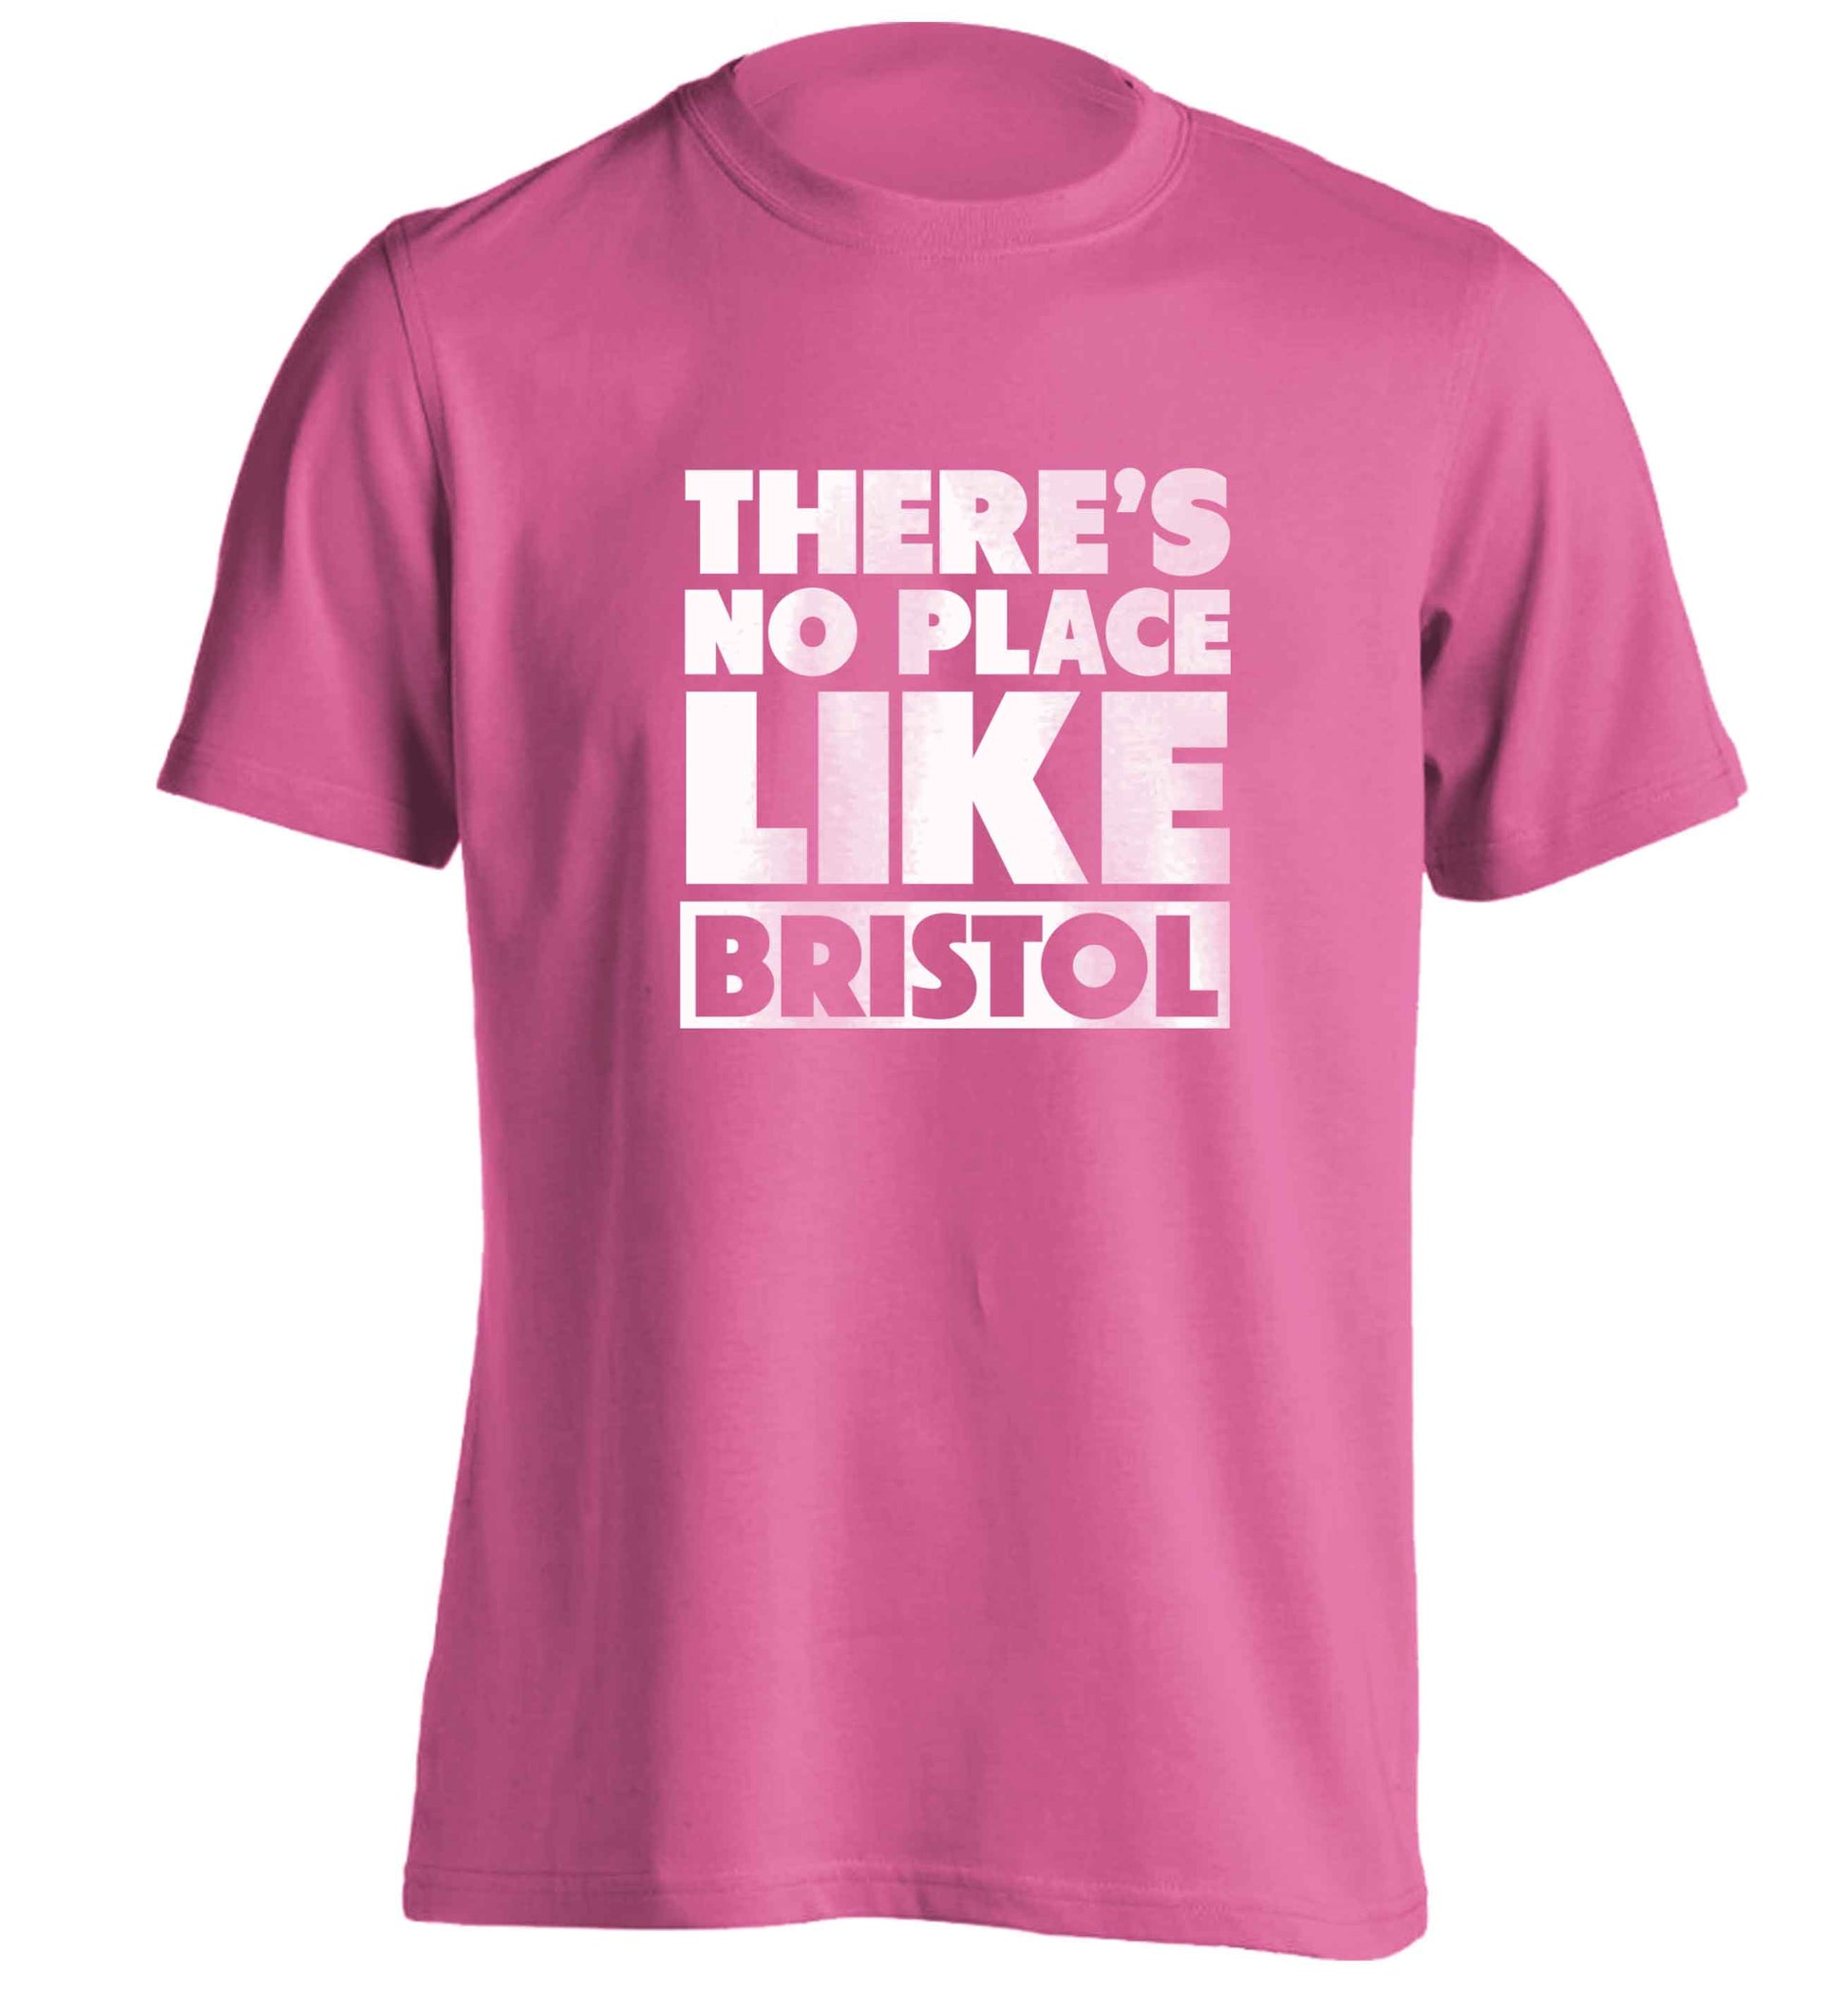 There's no place like Bristol adults unisex pink Tshirt 2XL